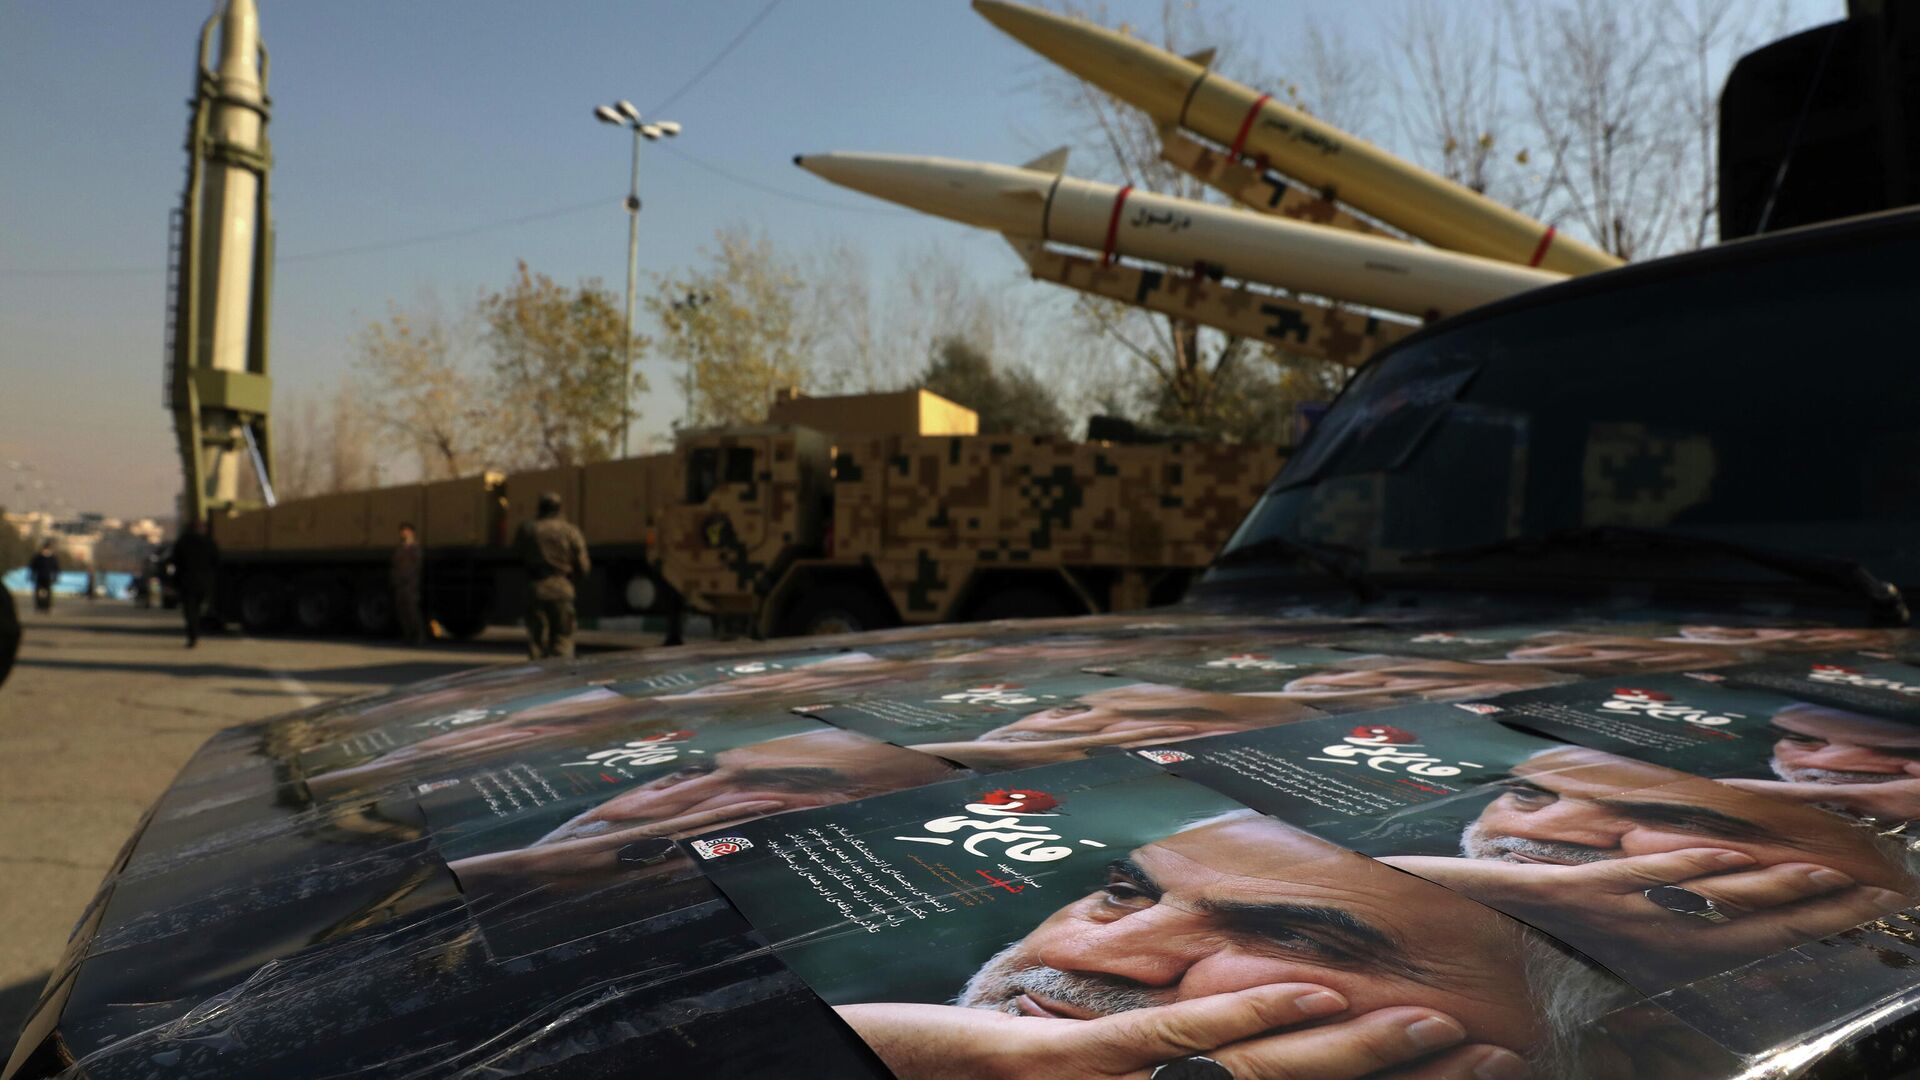 Posters of Iranian Gen. Qassem Soleimani, who was killed in Iraq in a U.S. drone attack in Jan. 3, 2020, are seen in front of Qiam, background left, Zolfaghar, top right, and Dezful missiles displayed in a missile capabilities exhibition by the paramilitary Revolutionary Guard a day prior to second anniversary of Iran's missile strike on U.S. bases in Iraq in retaliation for killing Gen. Soleimani, at Imam Khomeini grand mosque, in Tehran, Iran, Friday, Jan. 7, 2022. Iran put three ballistic missiles on display on Friday, as talks in Vienna aimed at reviving Tehran's nuclear deal with world powers flounder.  - Sputnik भारत, 1920, 06.12.2023